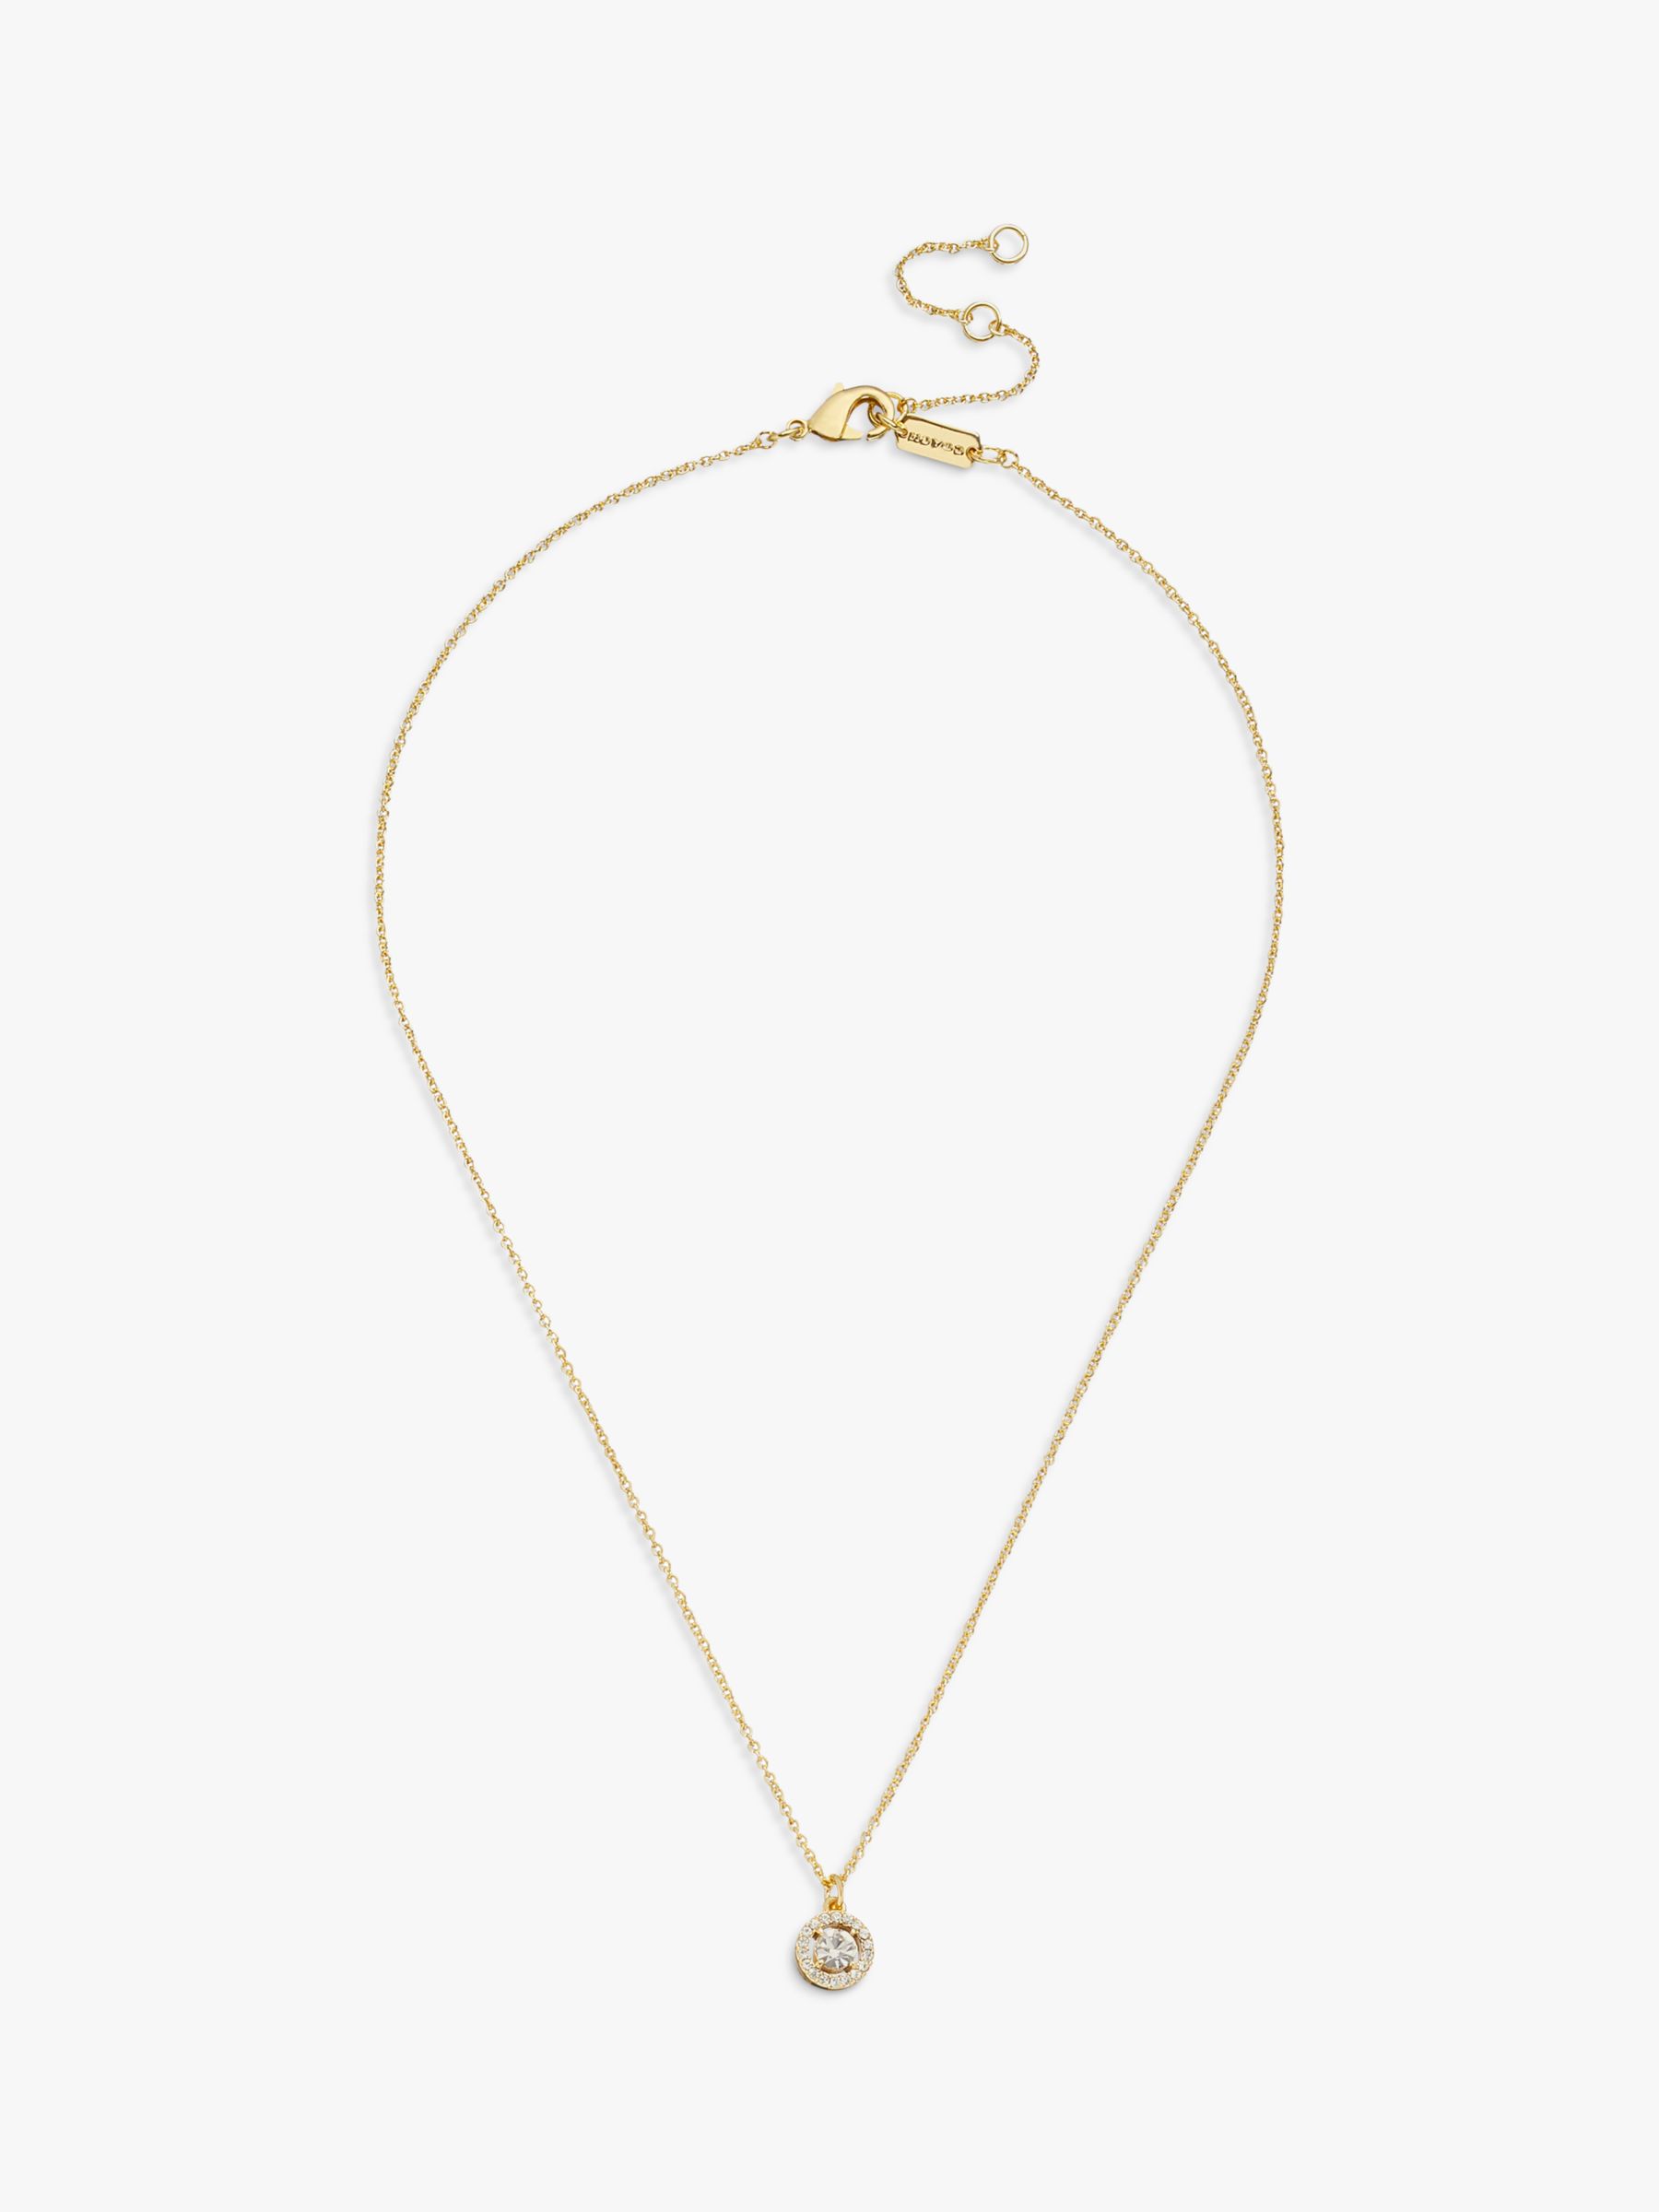 Coach Crystal Halo Pave Pendant Necklace, Gold